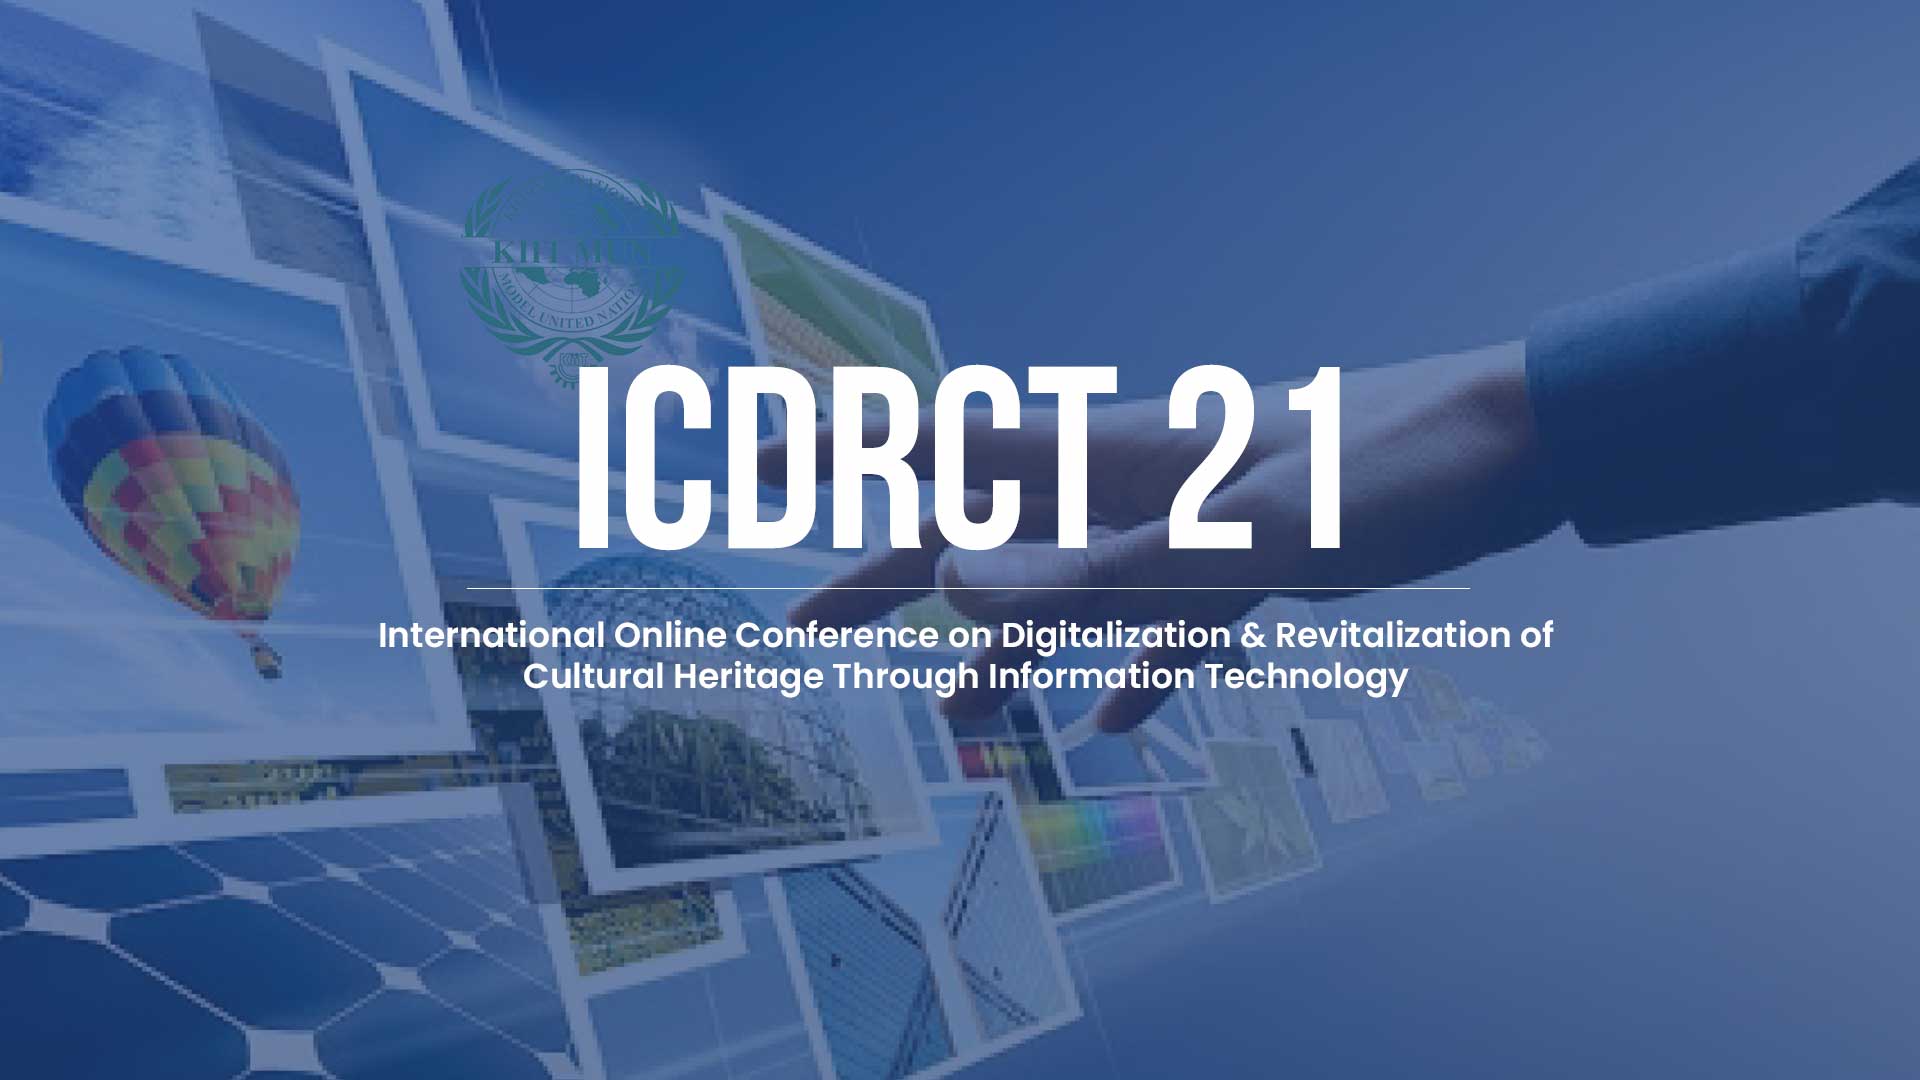 ICDRCT 21 - International Online Conference on Digitalization & Revitalization of Cultural Heritage Through Information Technology